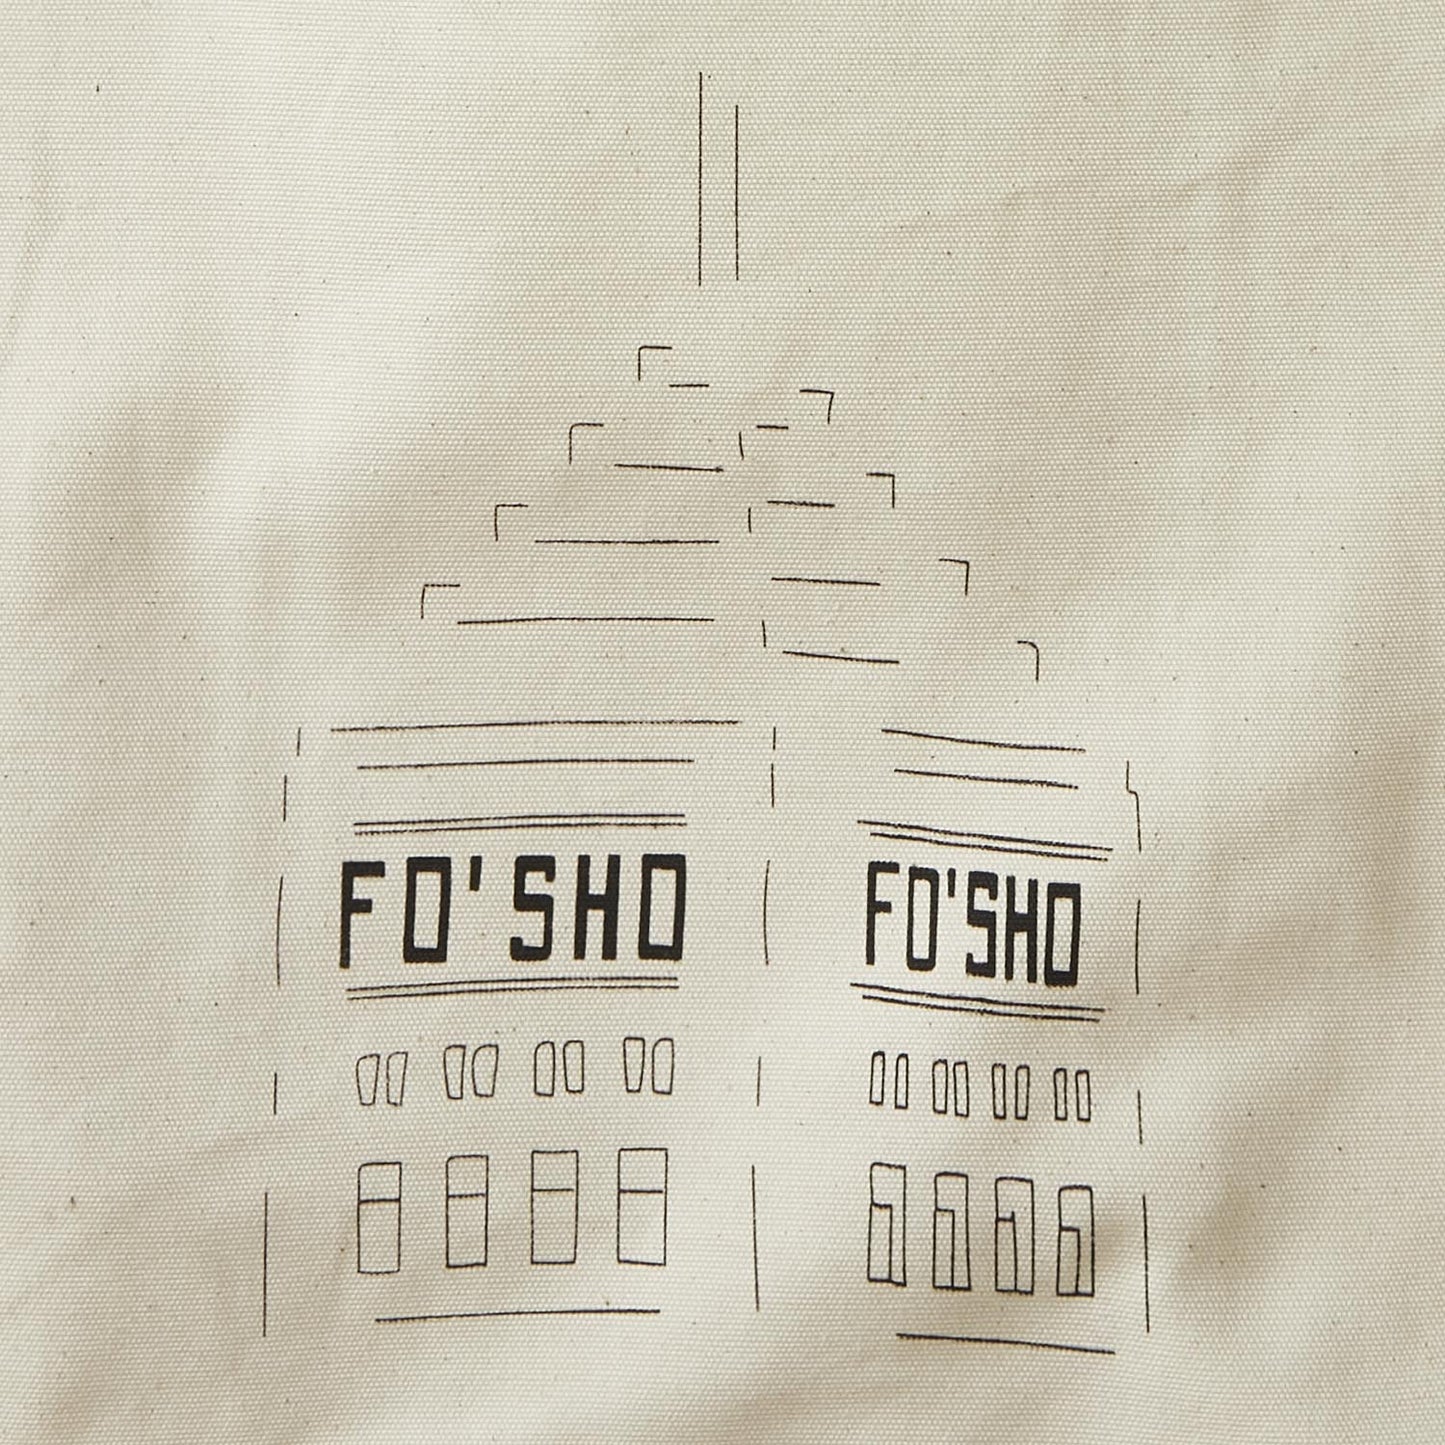 Details of natural market tote with illustration depicting the Foshay Tower with Fo' Sho in place of Foshay. minnesota clothing, minnesota apparel, minnesota accessories, minnesota gifts, minnesota goods, minnesota themed clothing, minnesota themed apparel, minnesota themed gifts, minnesota themed goods, minnesota totes, minnesota tote bags, minnesota tote, minnesota themed tote bags, minnesota themed totes, minnesota themed tote